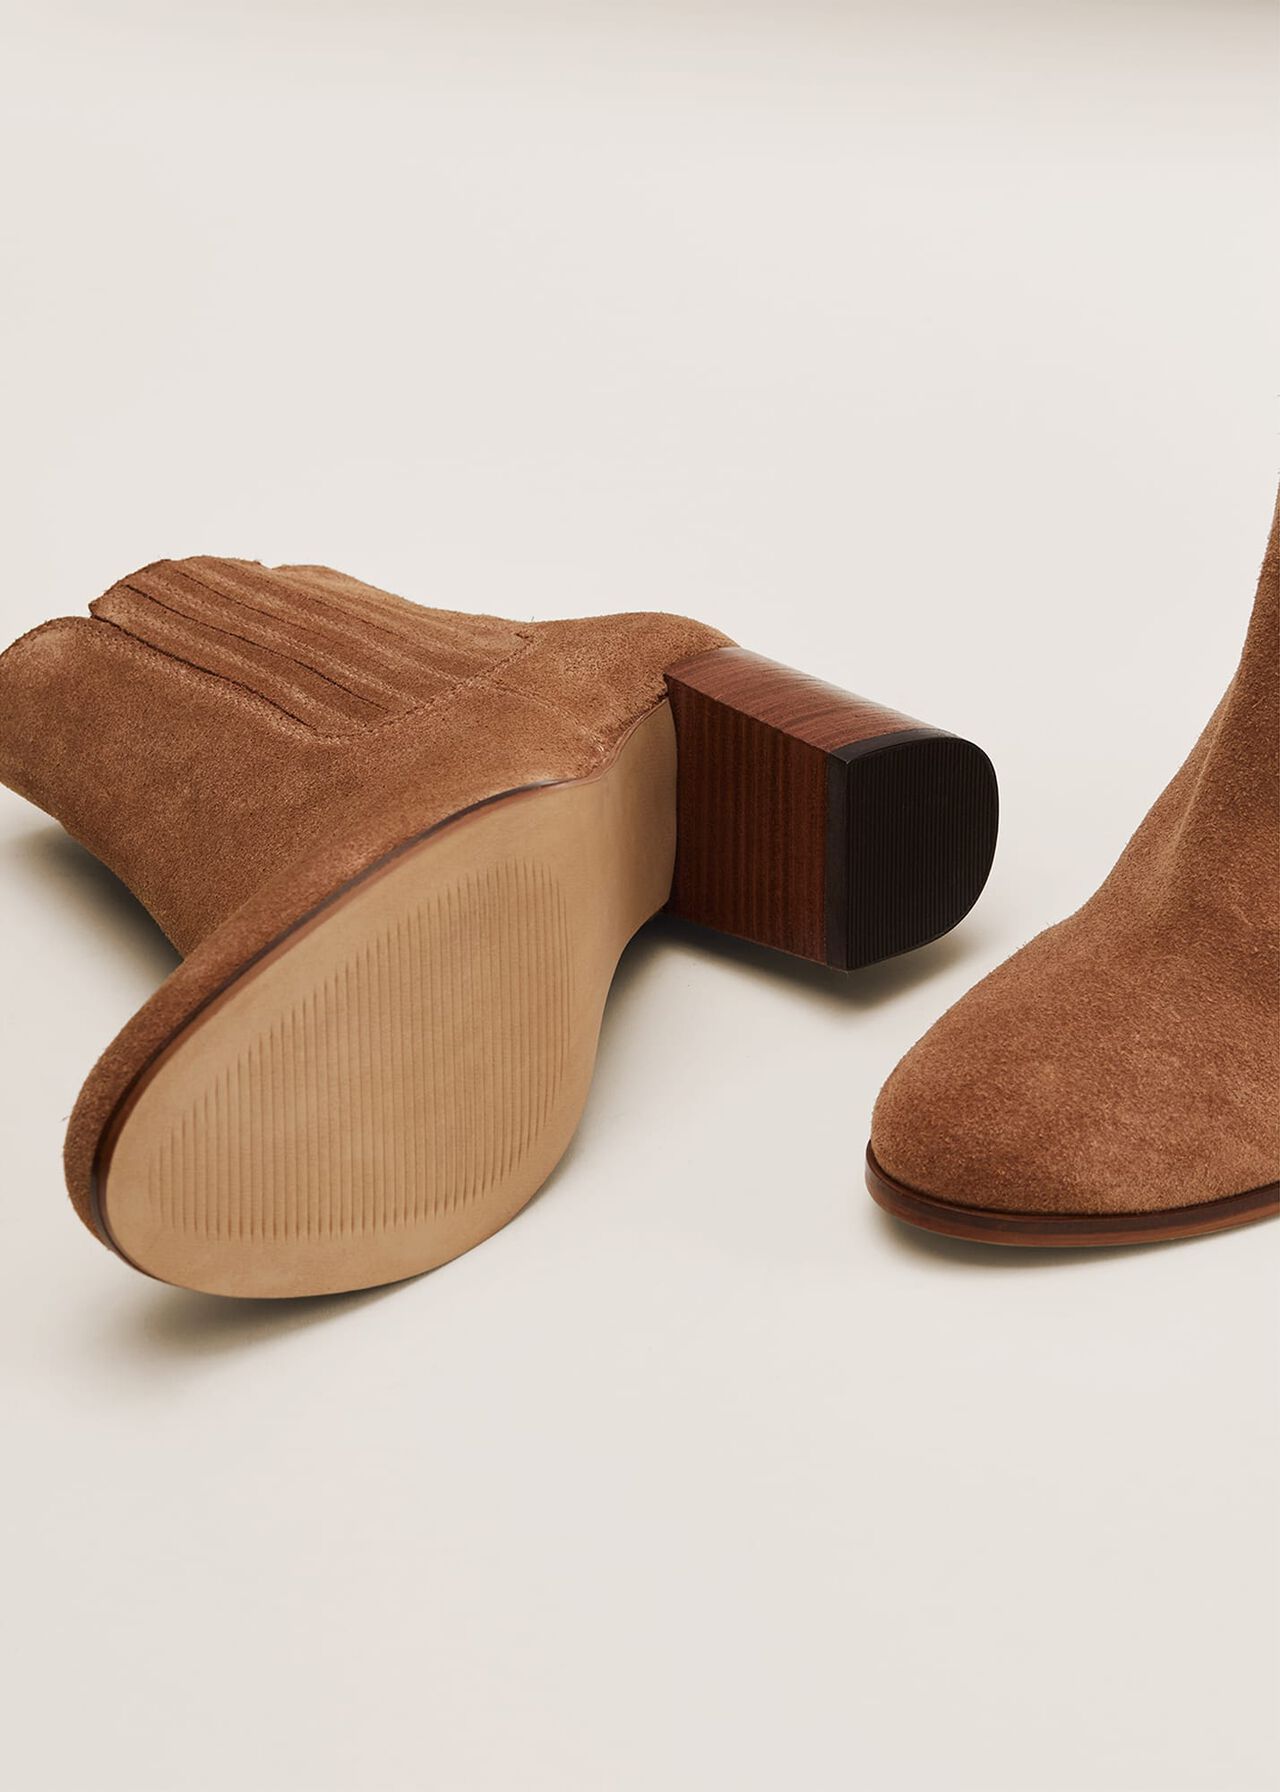 Camila Tan Suede Ankle Boots